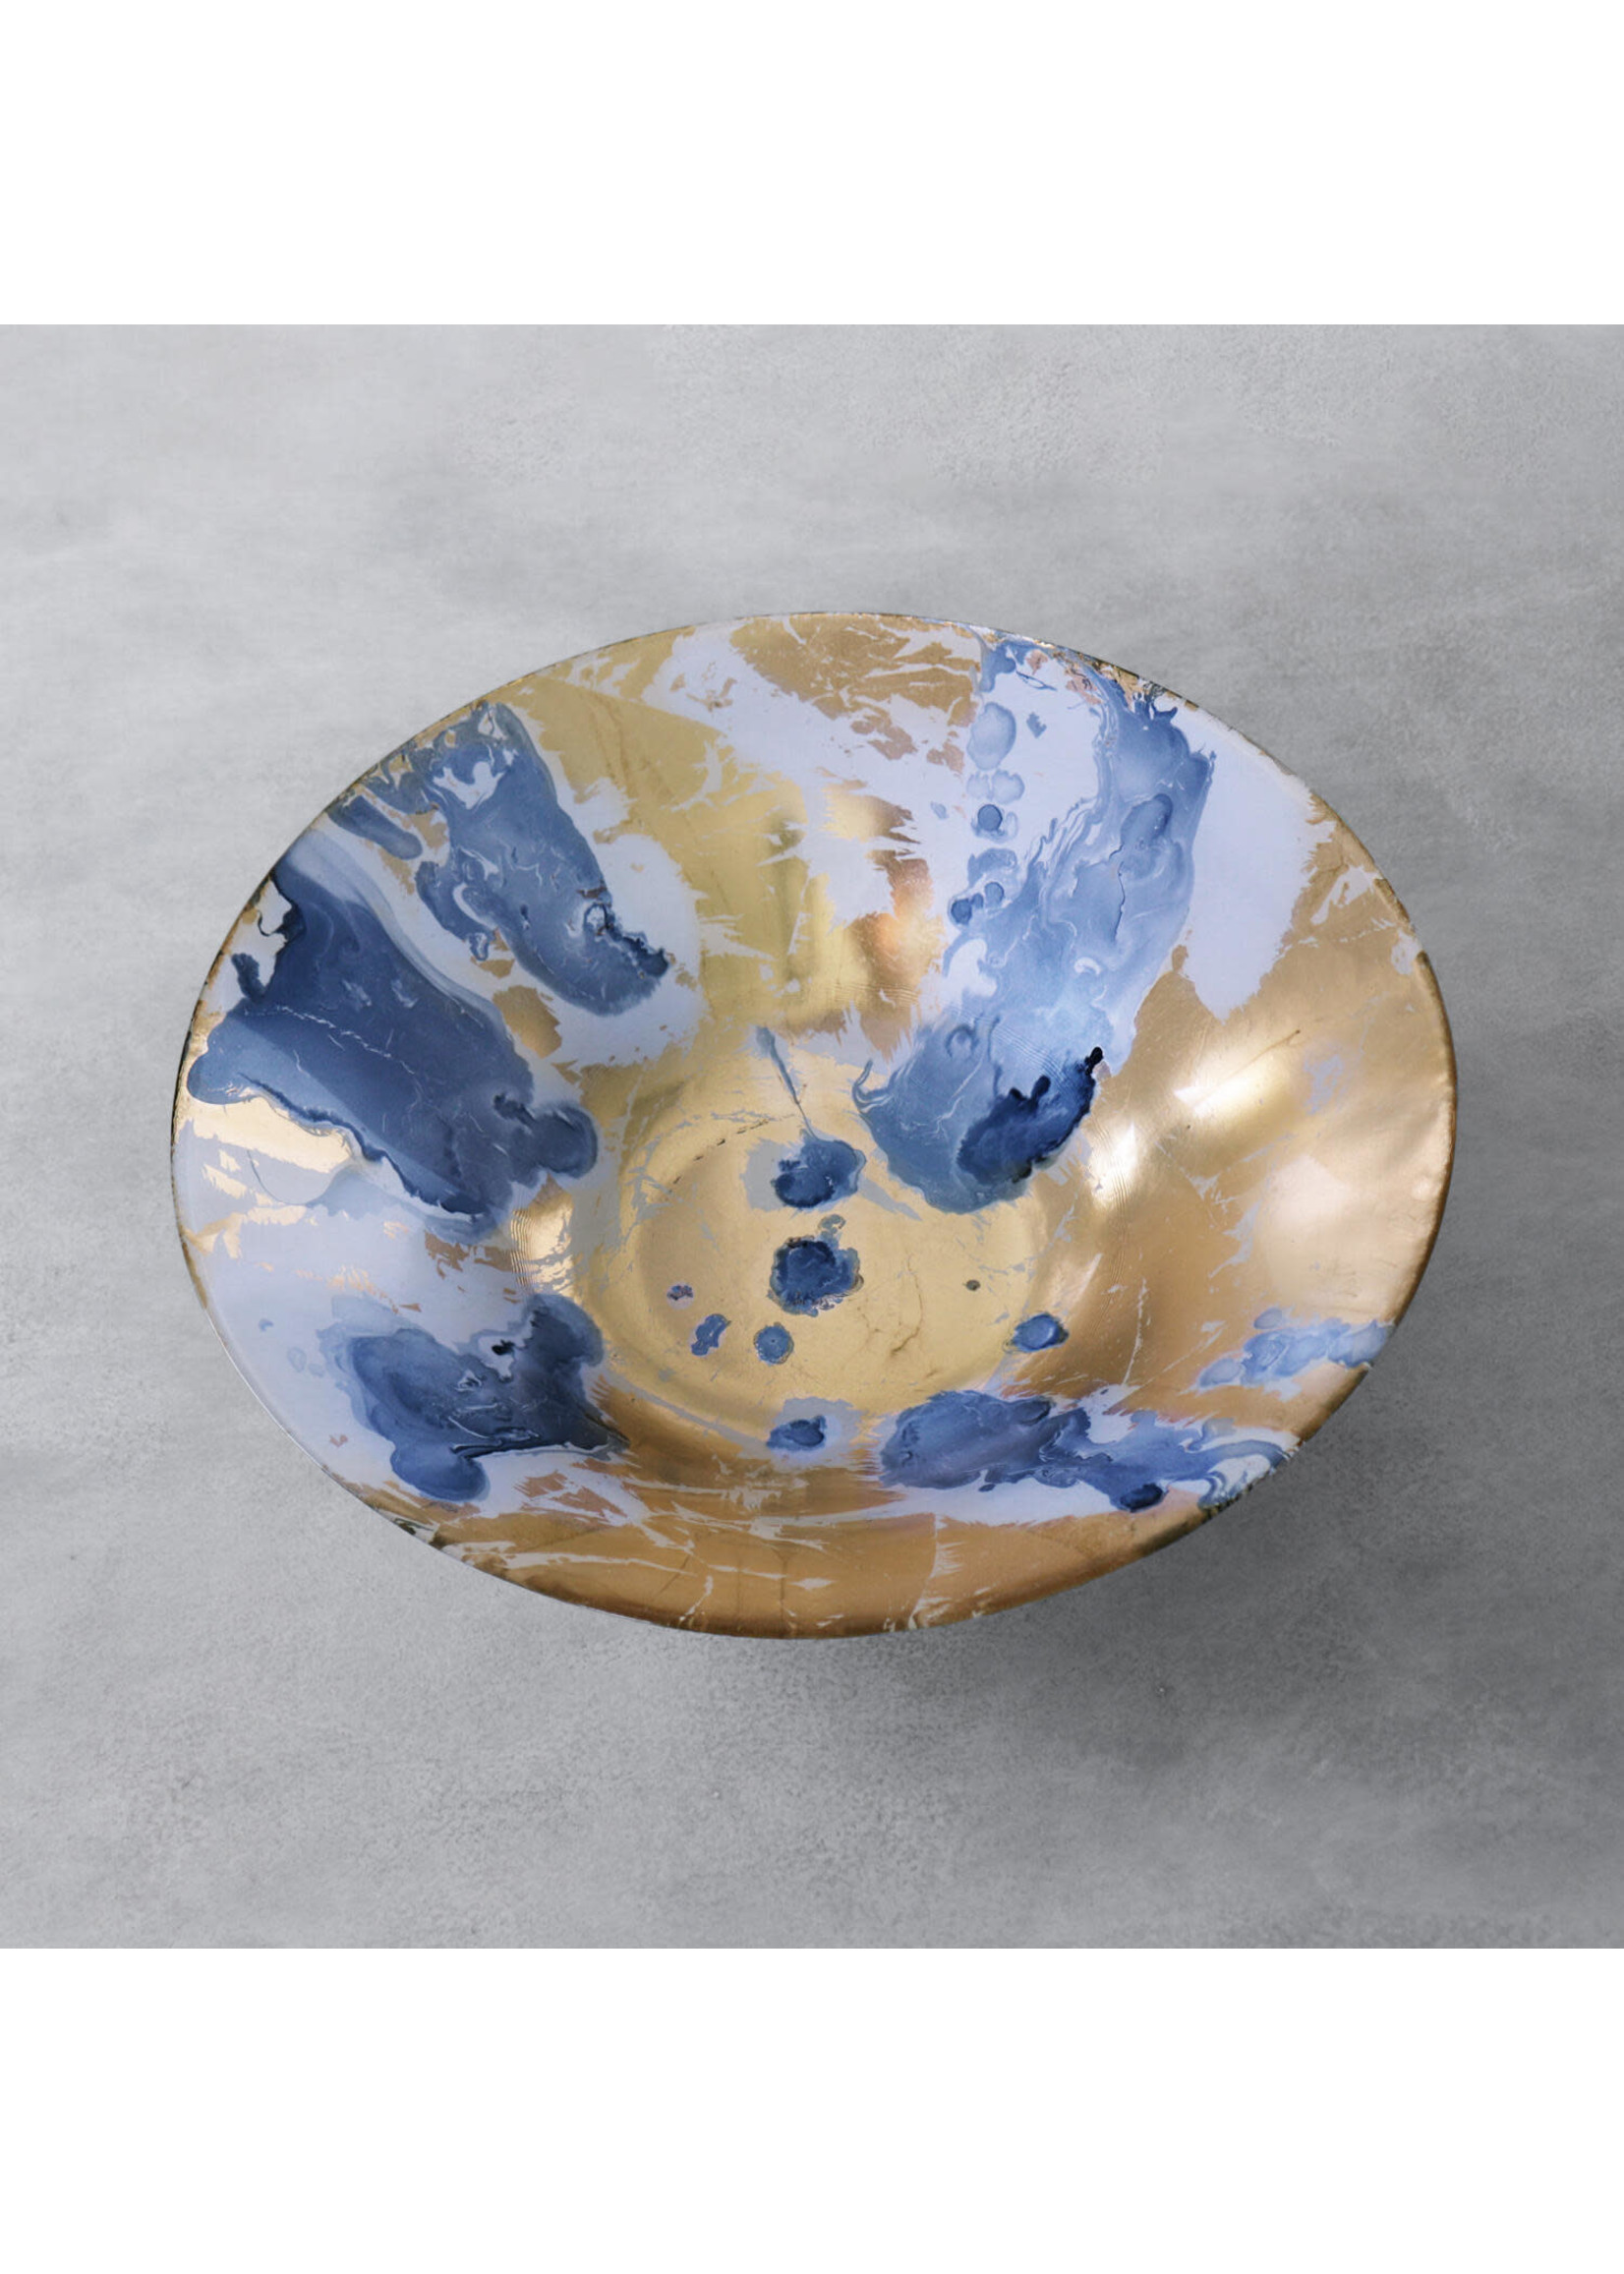 Beatriz Ball Beatriz Ball New Orleans Painted Glass Centerpiece Bowl, Blue and Gold